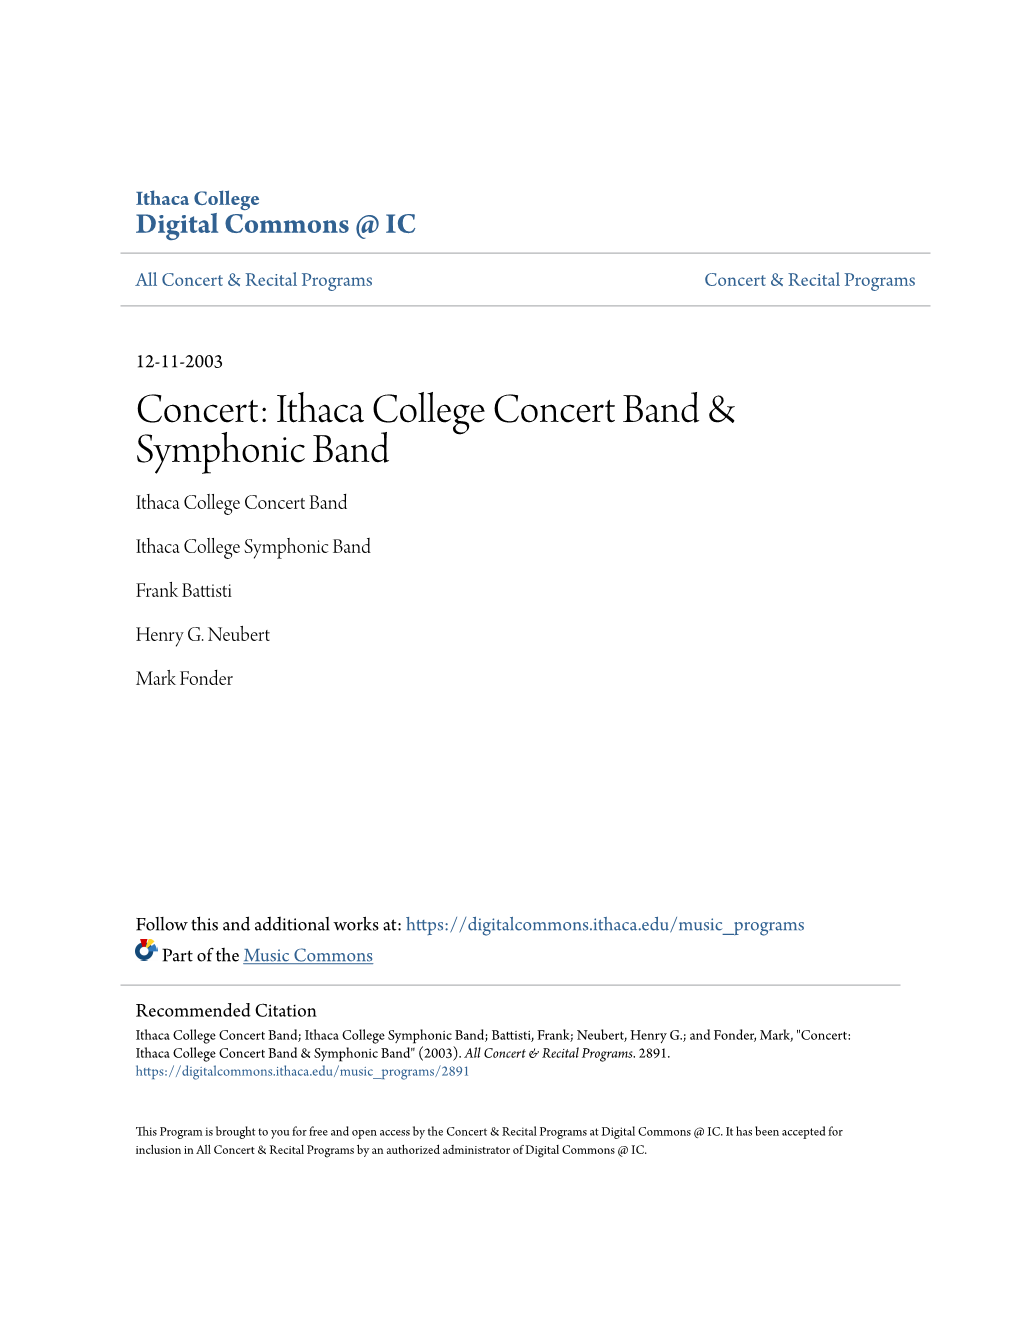 Ithaca College Concert Band & Symphonic Band